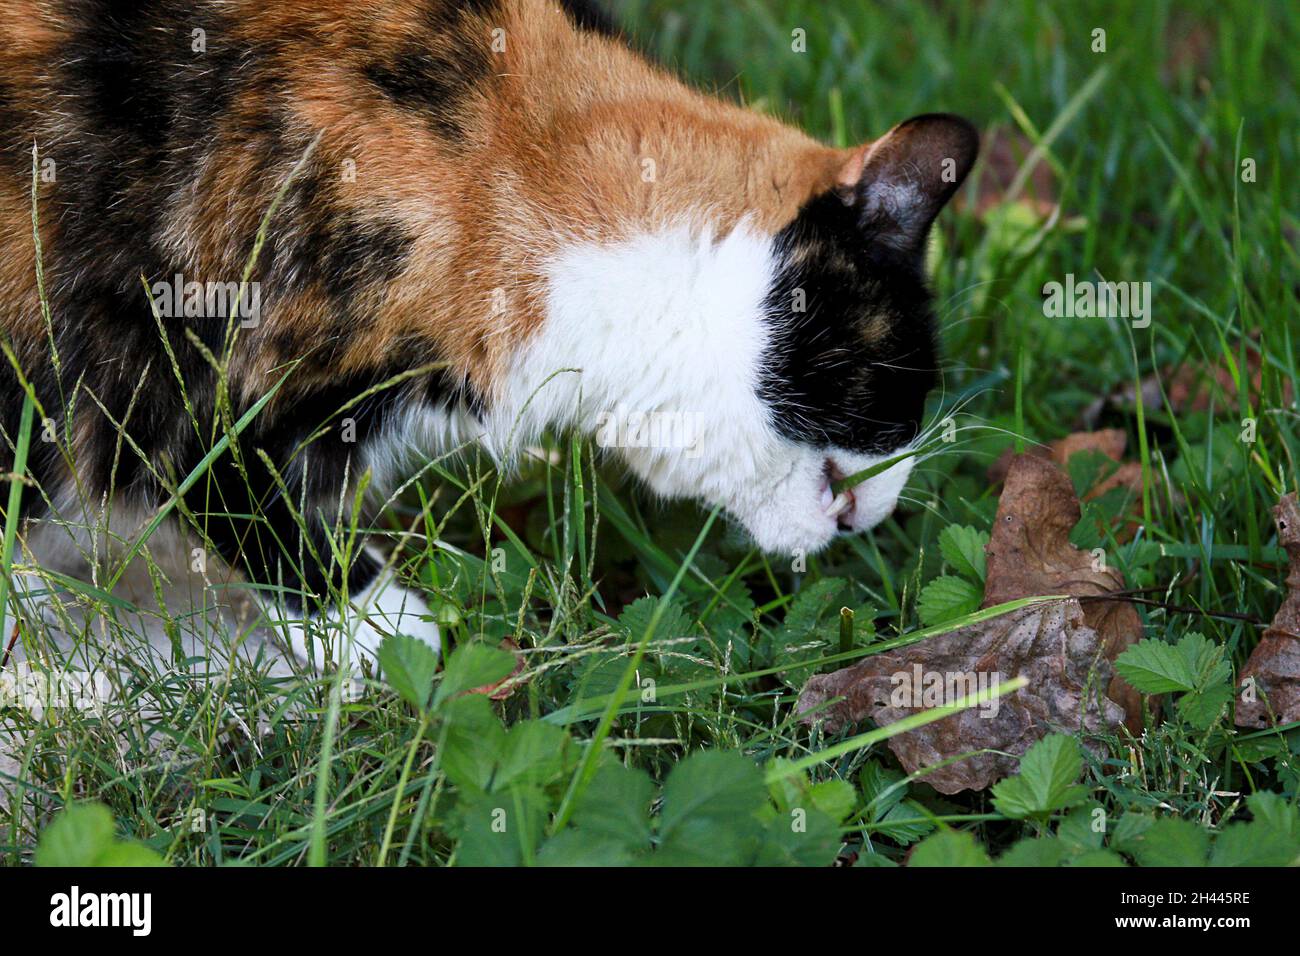 A calico cat eating grass medicinally in summer Stock Photo